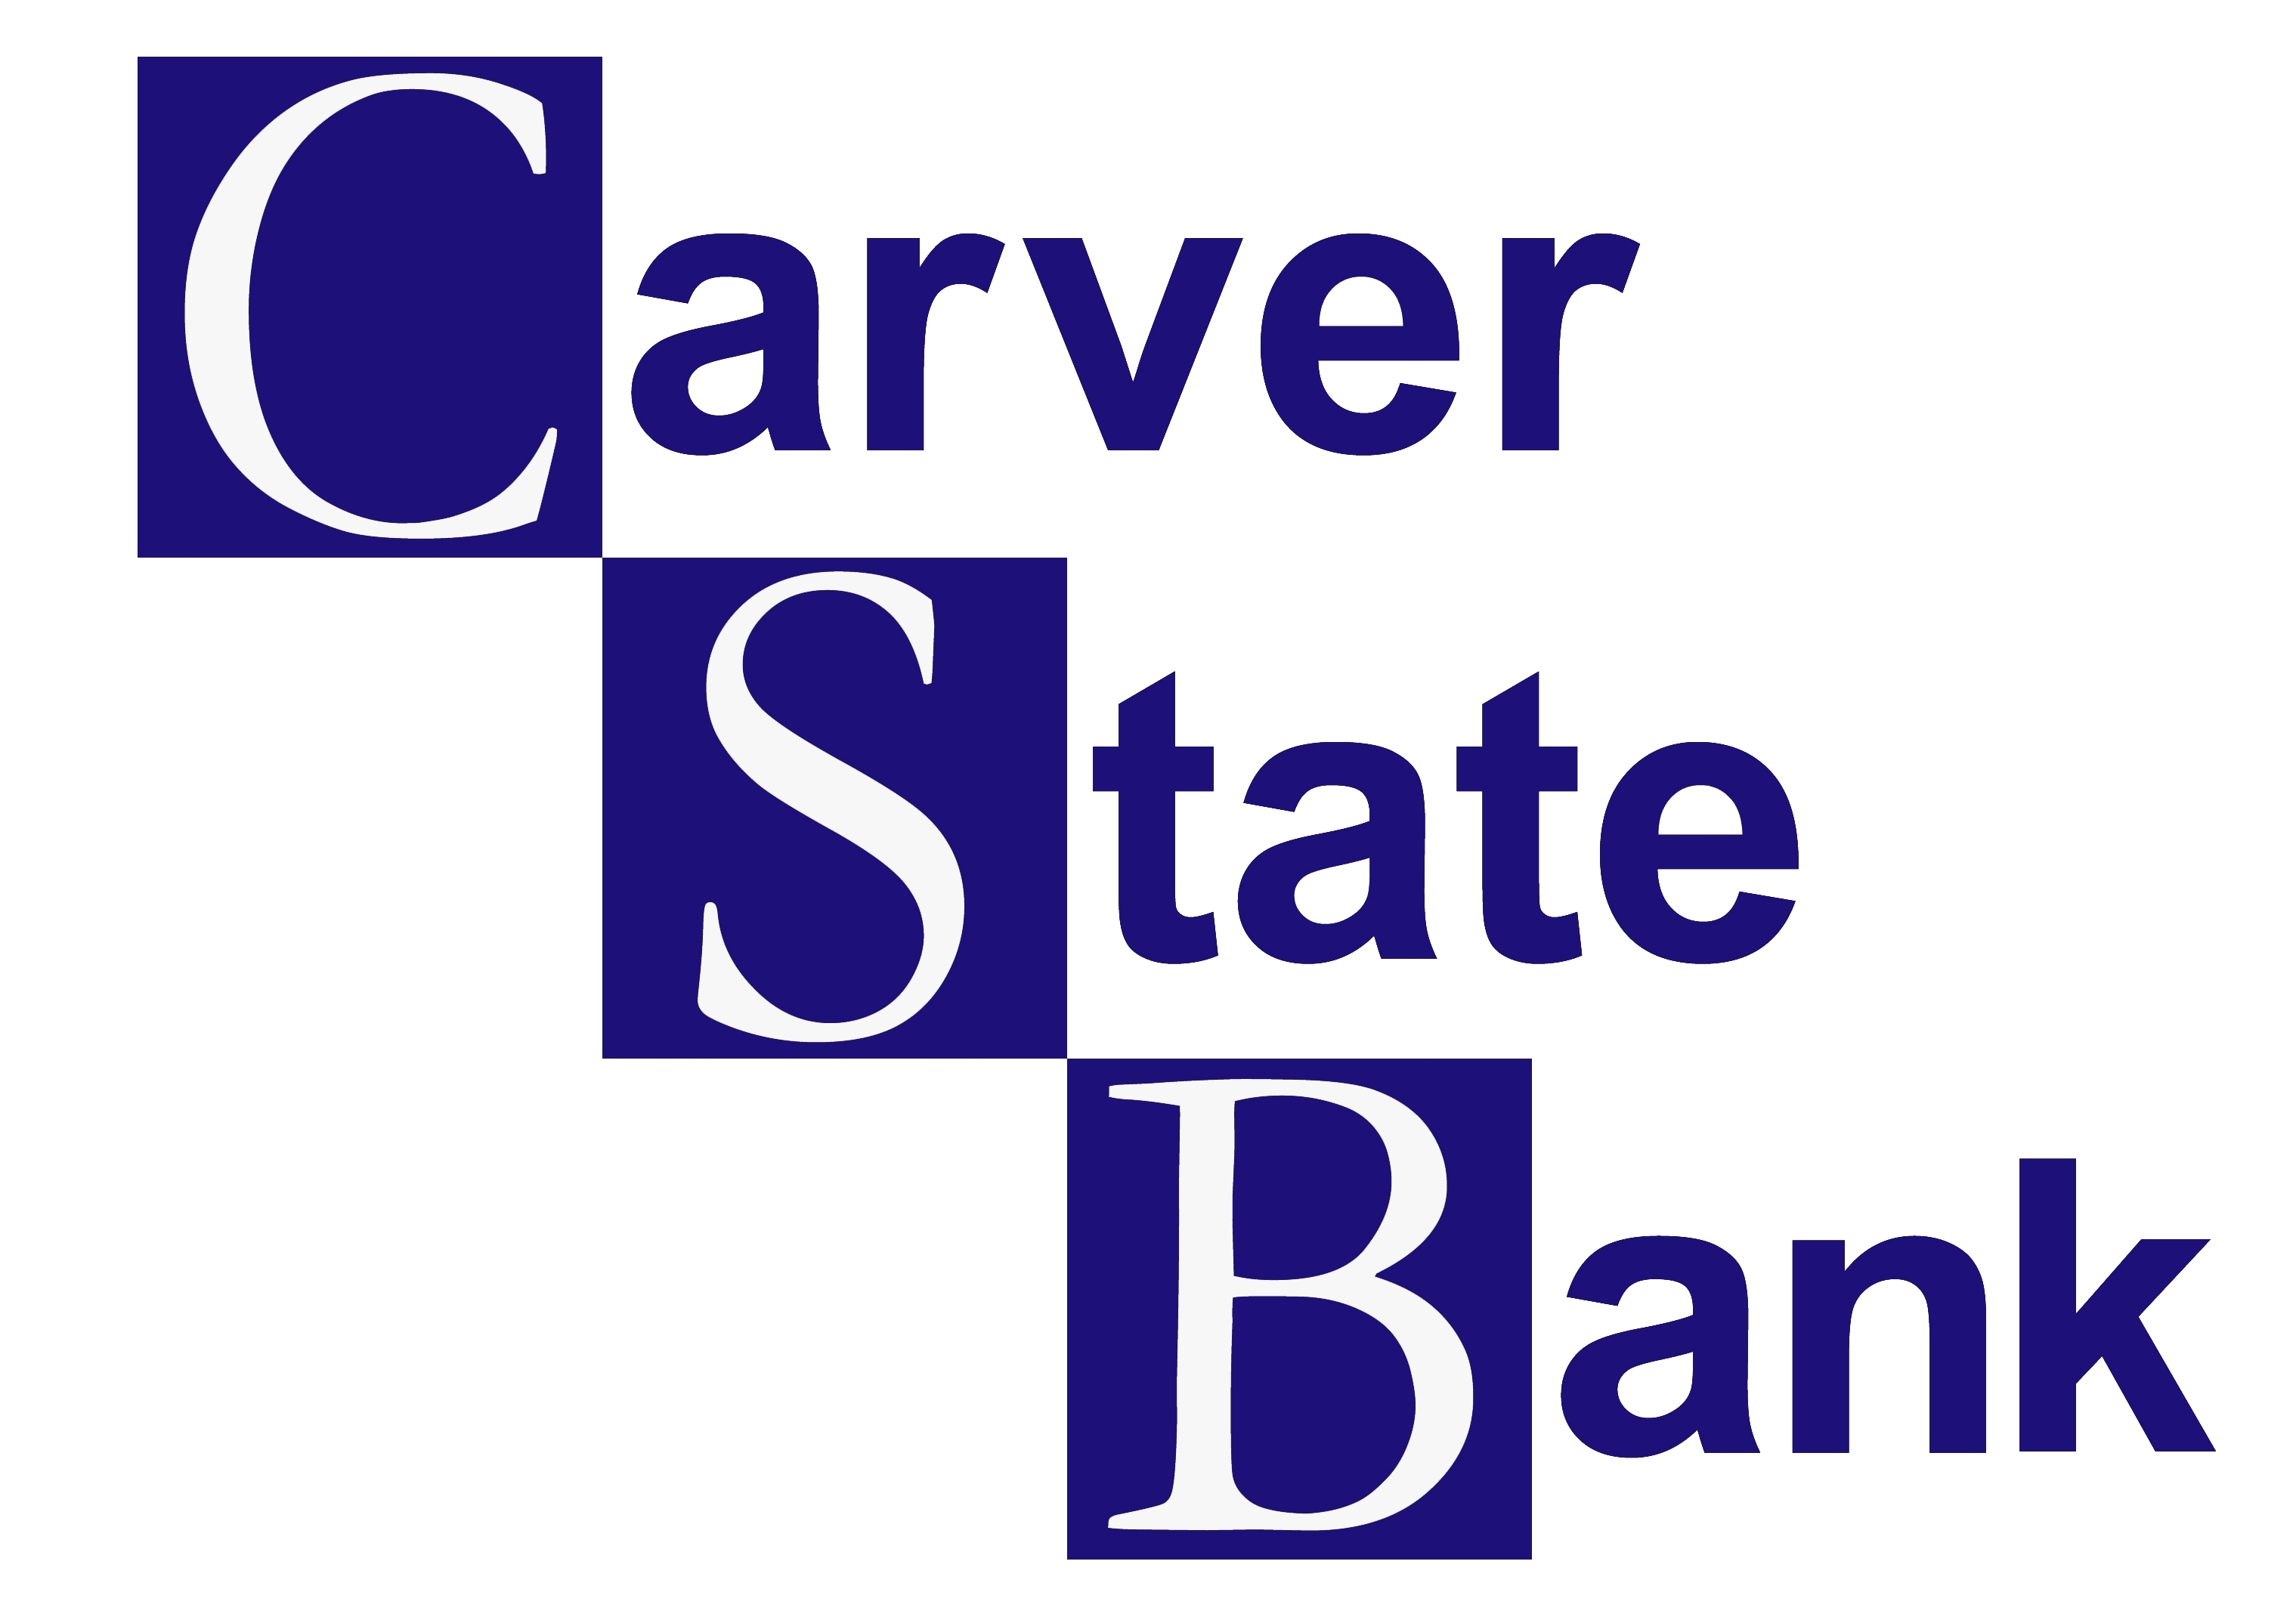 Carver State Bank